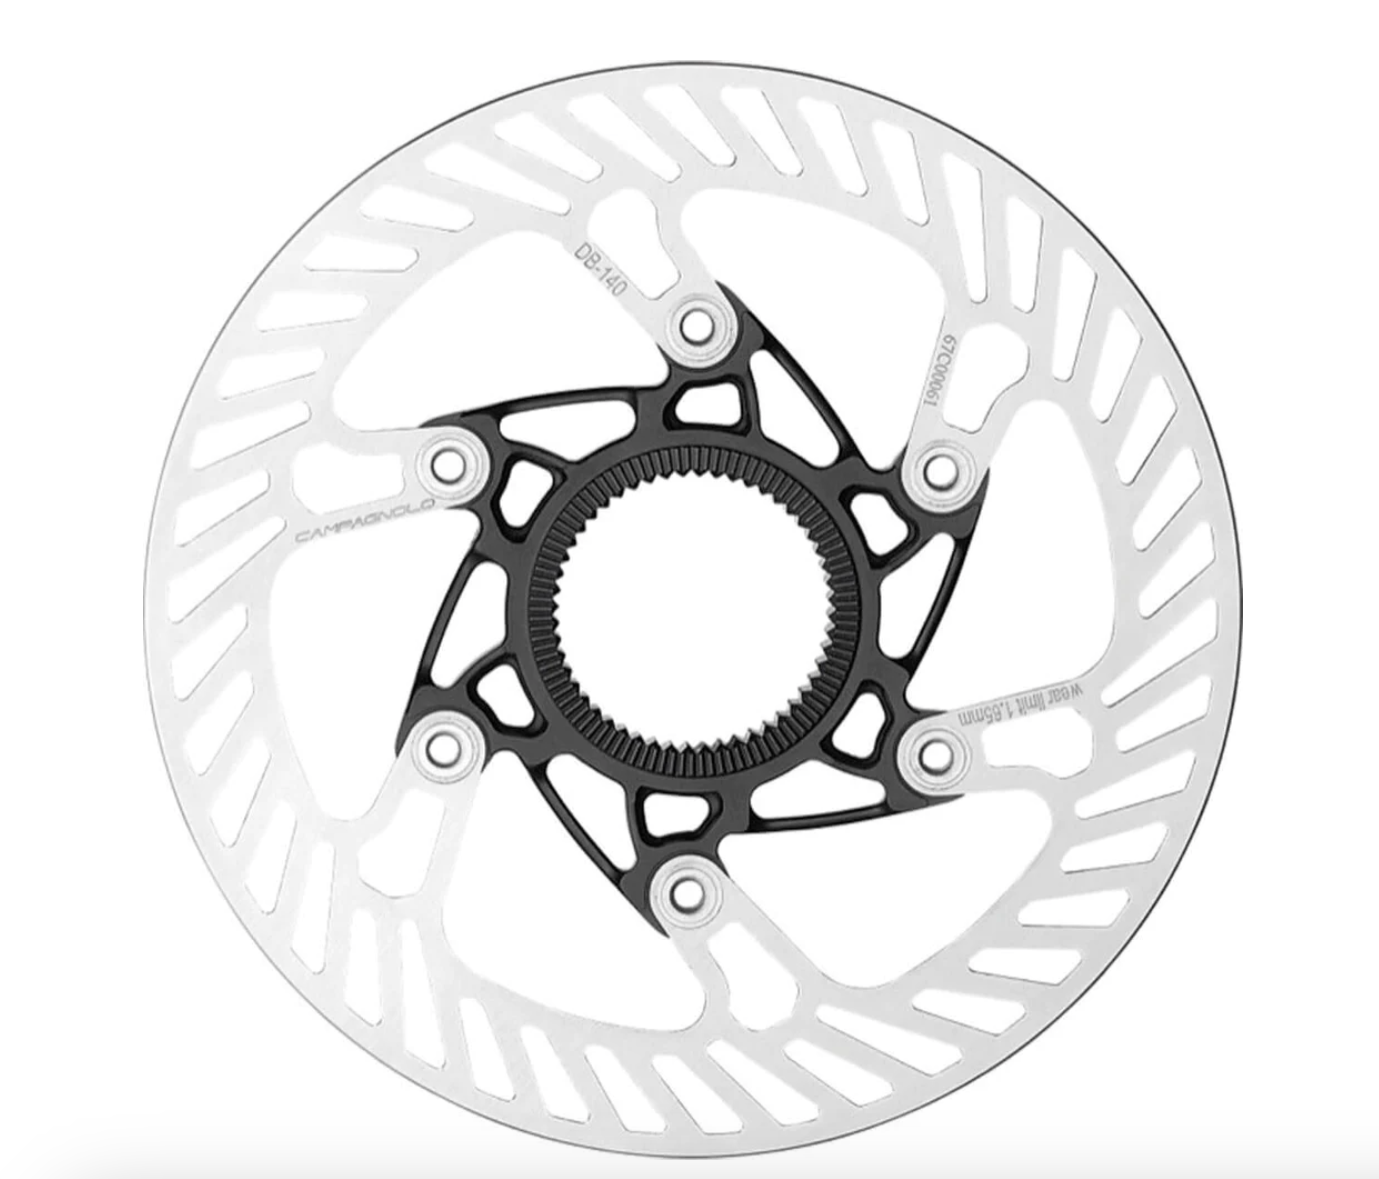 Campagnolo AFS 03 Disc Brake Rotor - 140mm